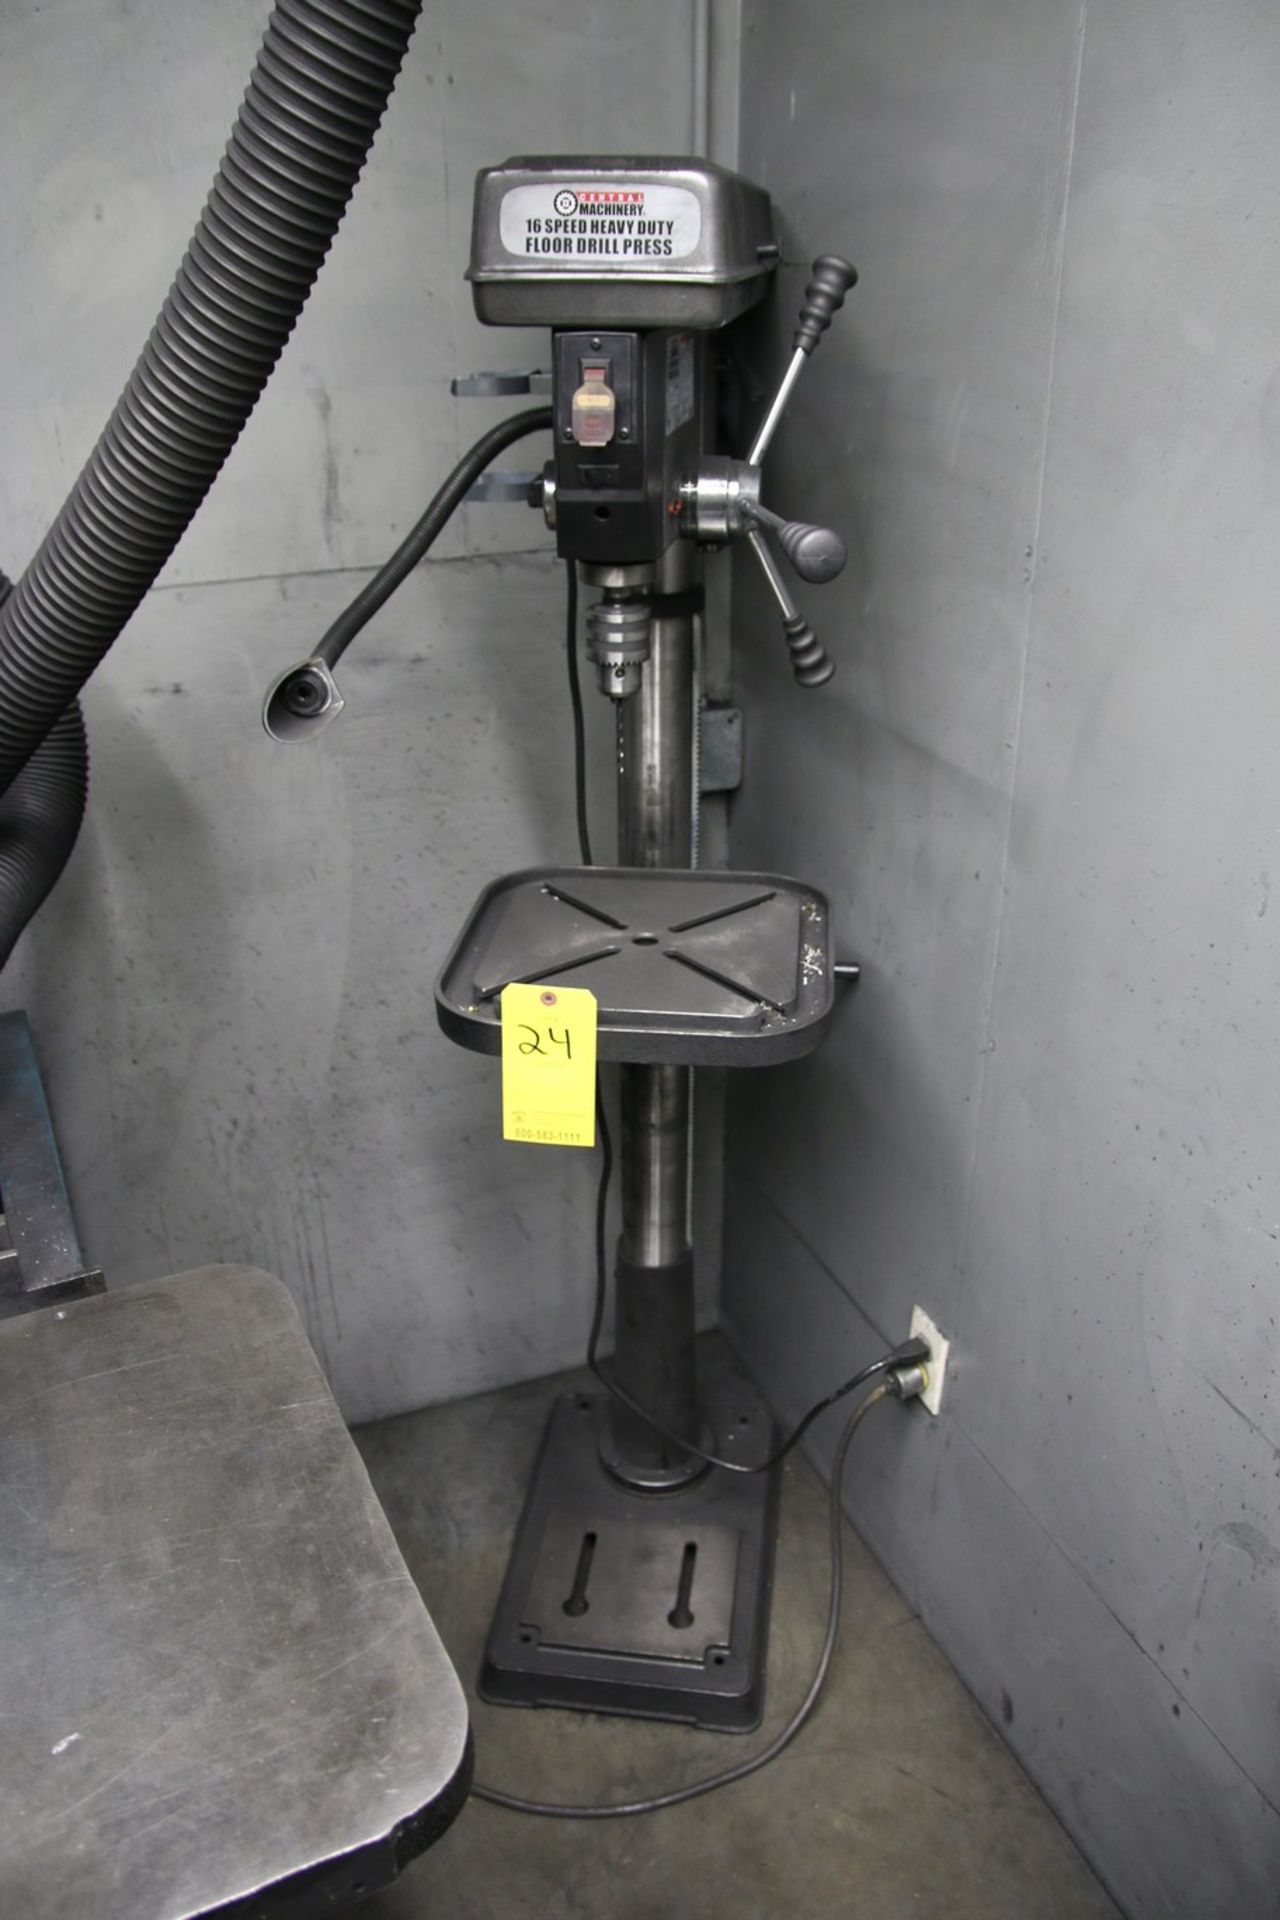 Central Machinery Central Machinery Heavy Duty Floor Drill Press 16 Speed, 3500RPM Maximum